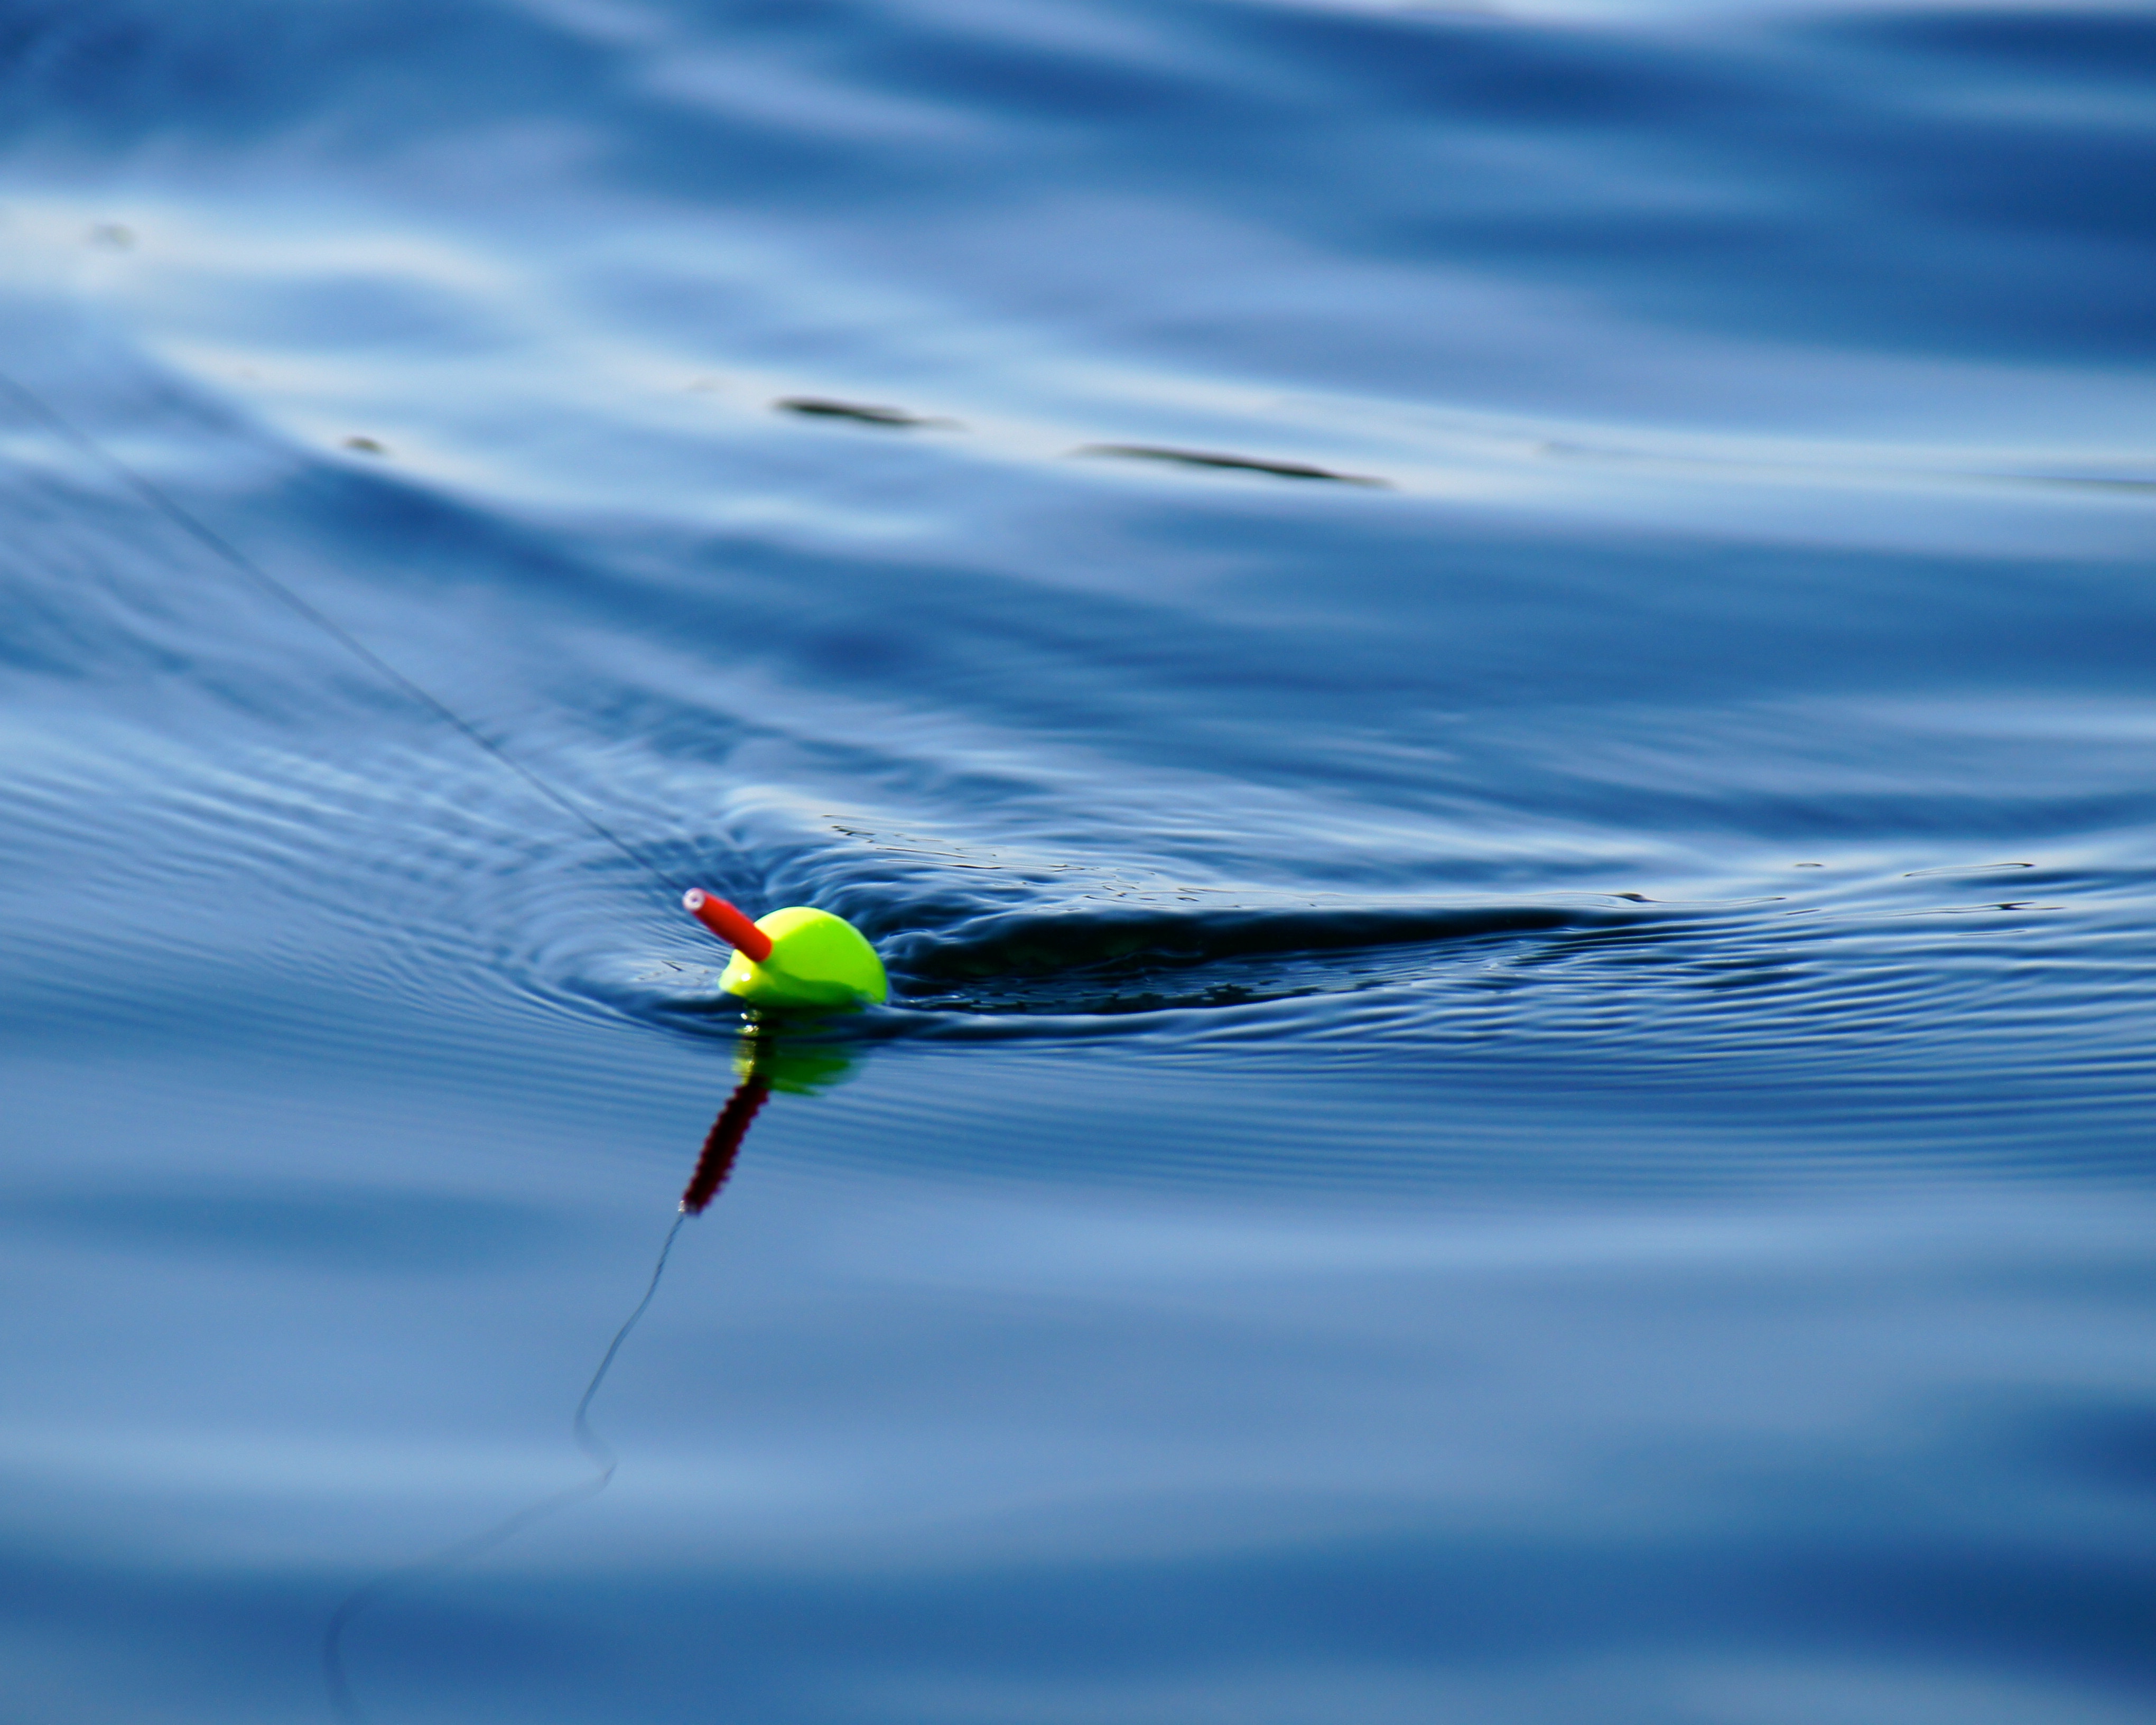 Fishing bobber in the water